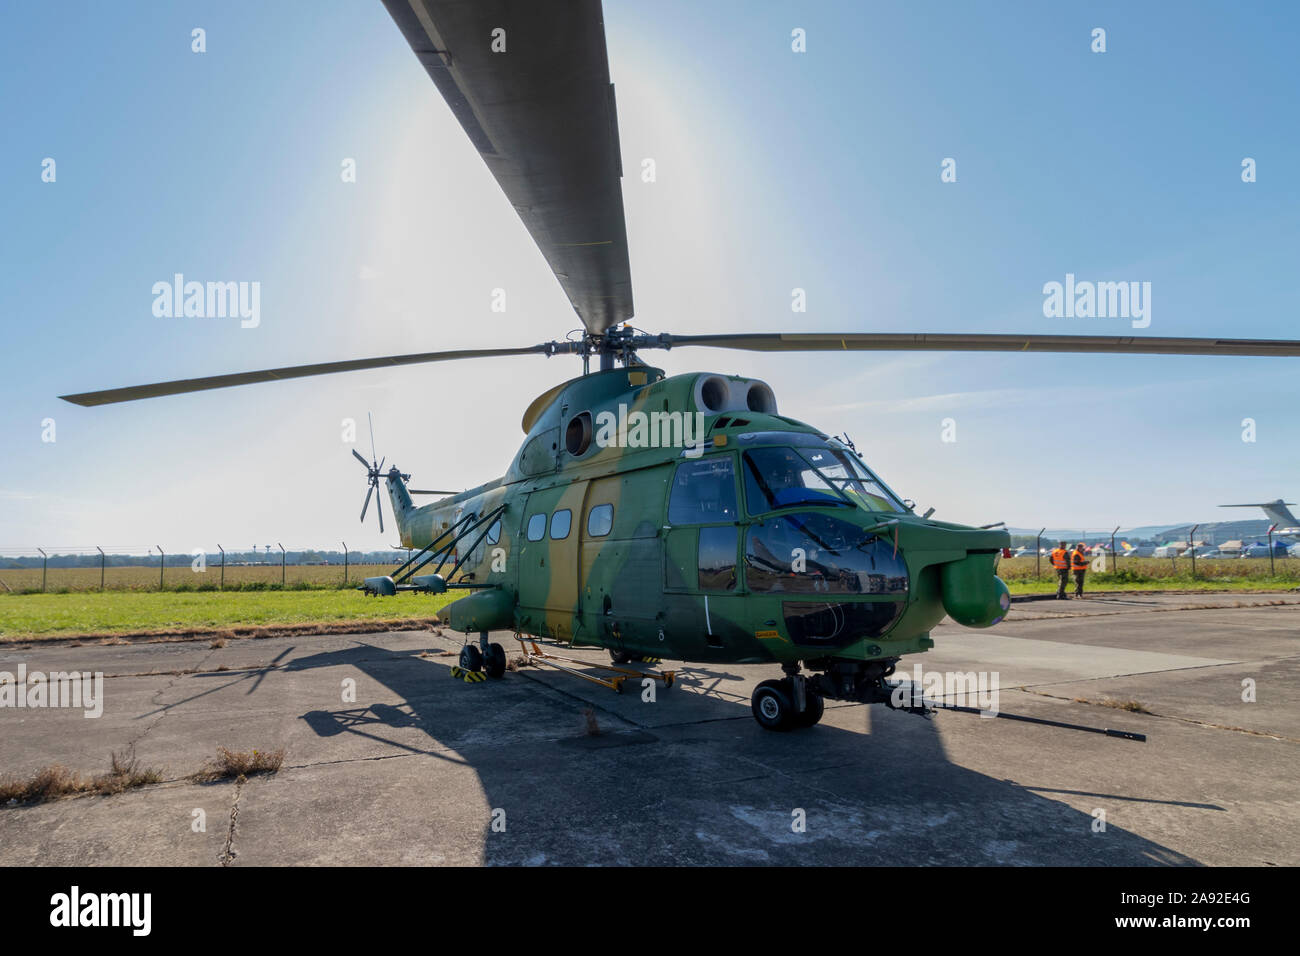 OSTRAVA, CZECH REPUBLIC - SEPTEMBER 22, 2019: NATO Days. An IAR 330 SOCAT combat helicopter of the Romanian Air Force is on static display. Wide angle Stock Photo